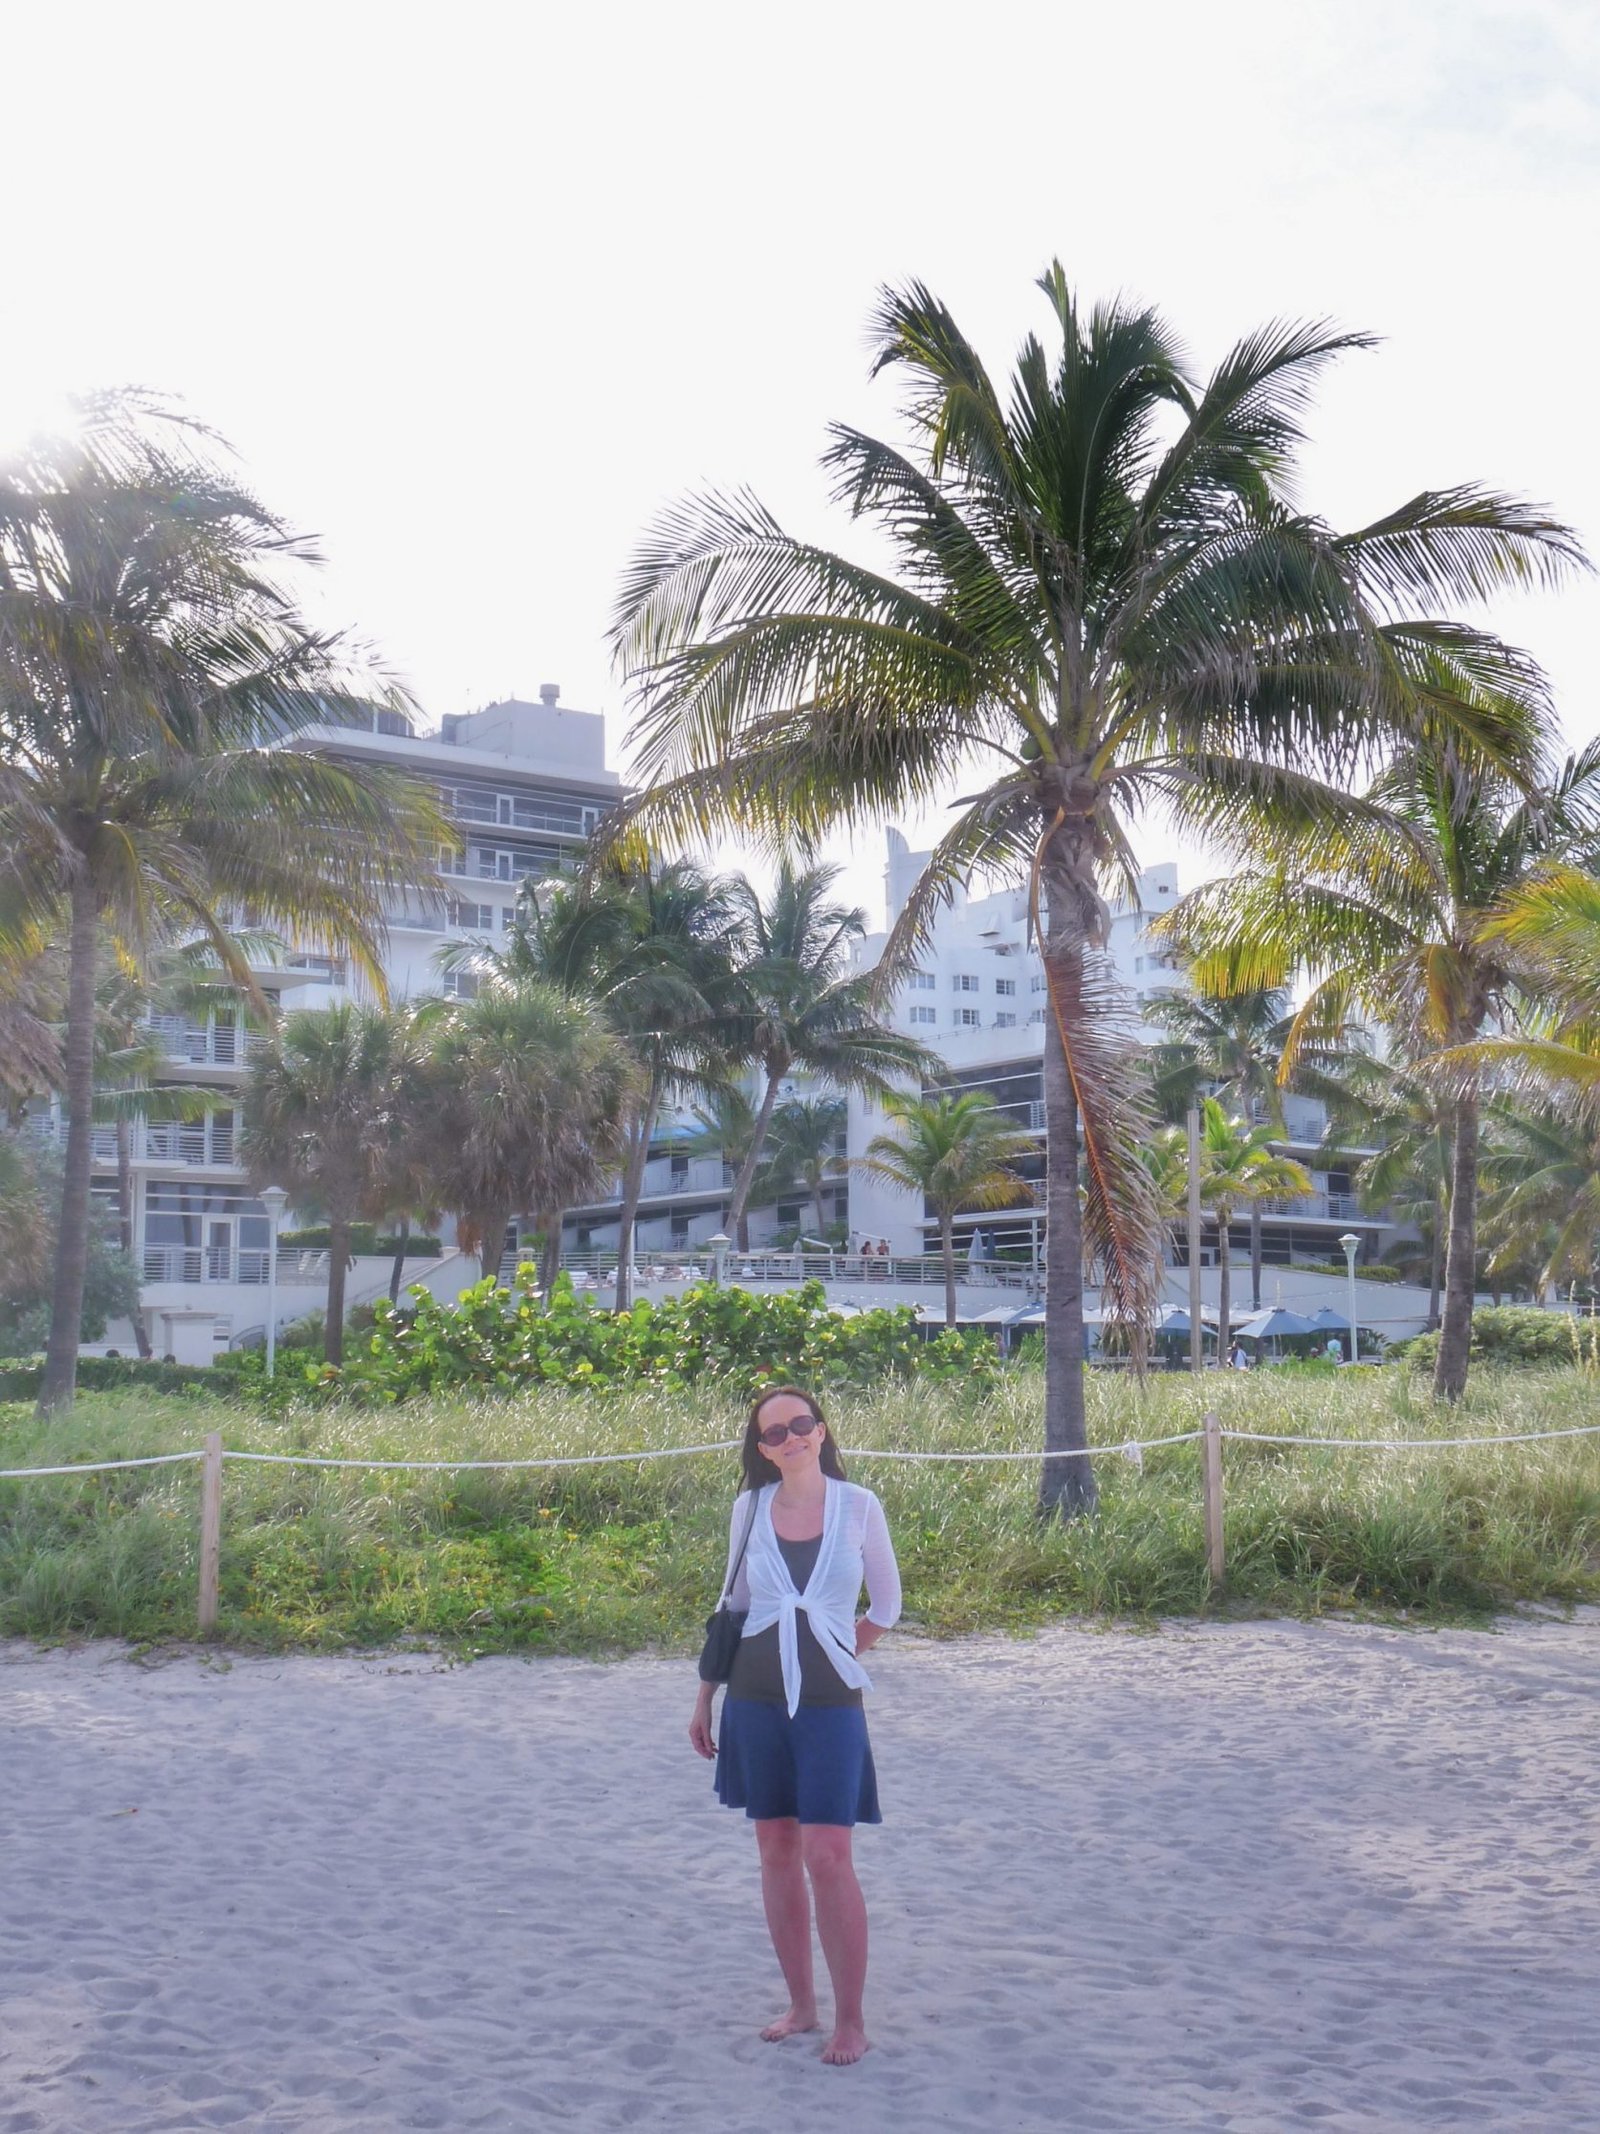 How to see South Beach Miami on a budget